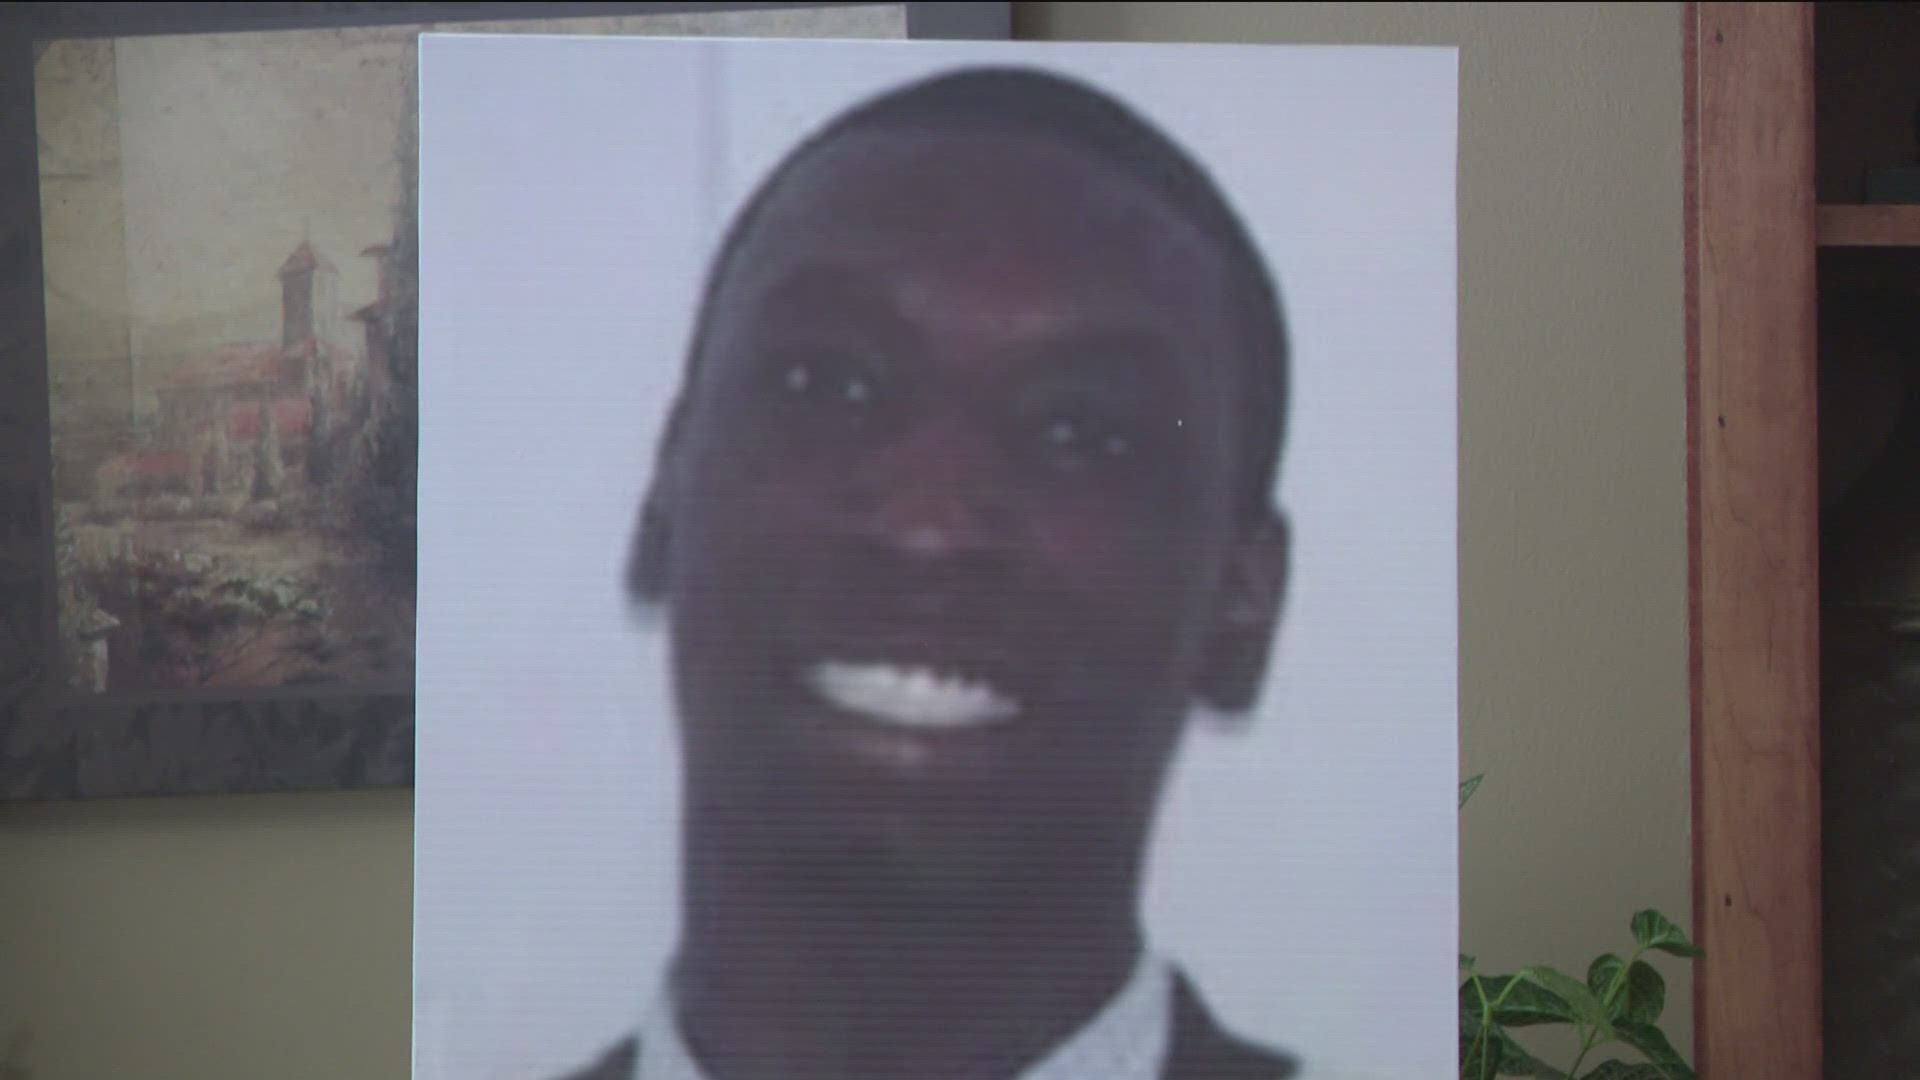 Attorneys representing the family allege that Dino Walker was killed after a detention officer left his post for an hour, leaving the detainee unprotected.